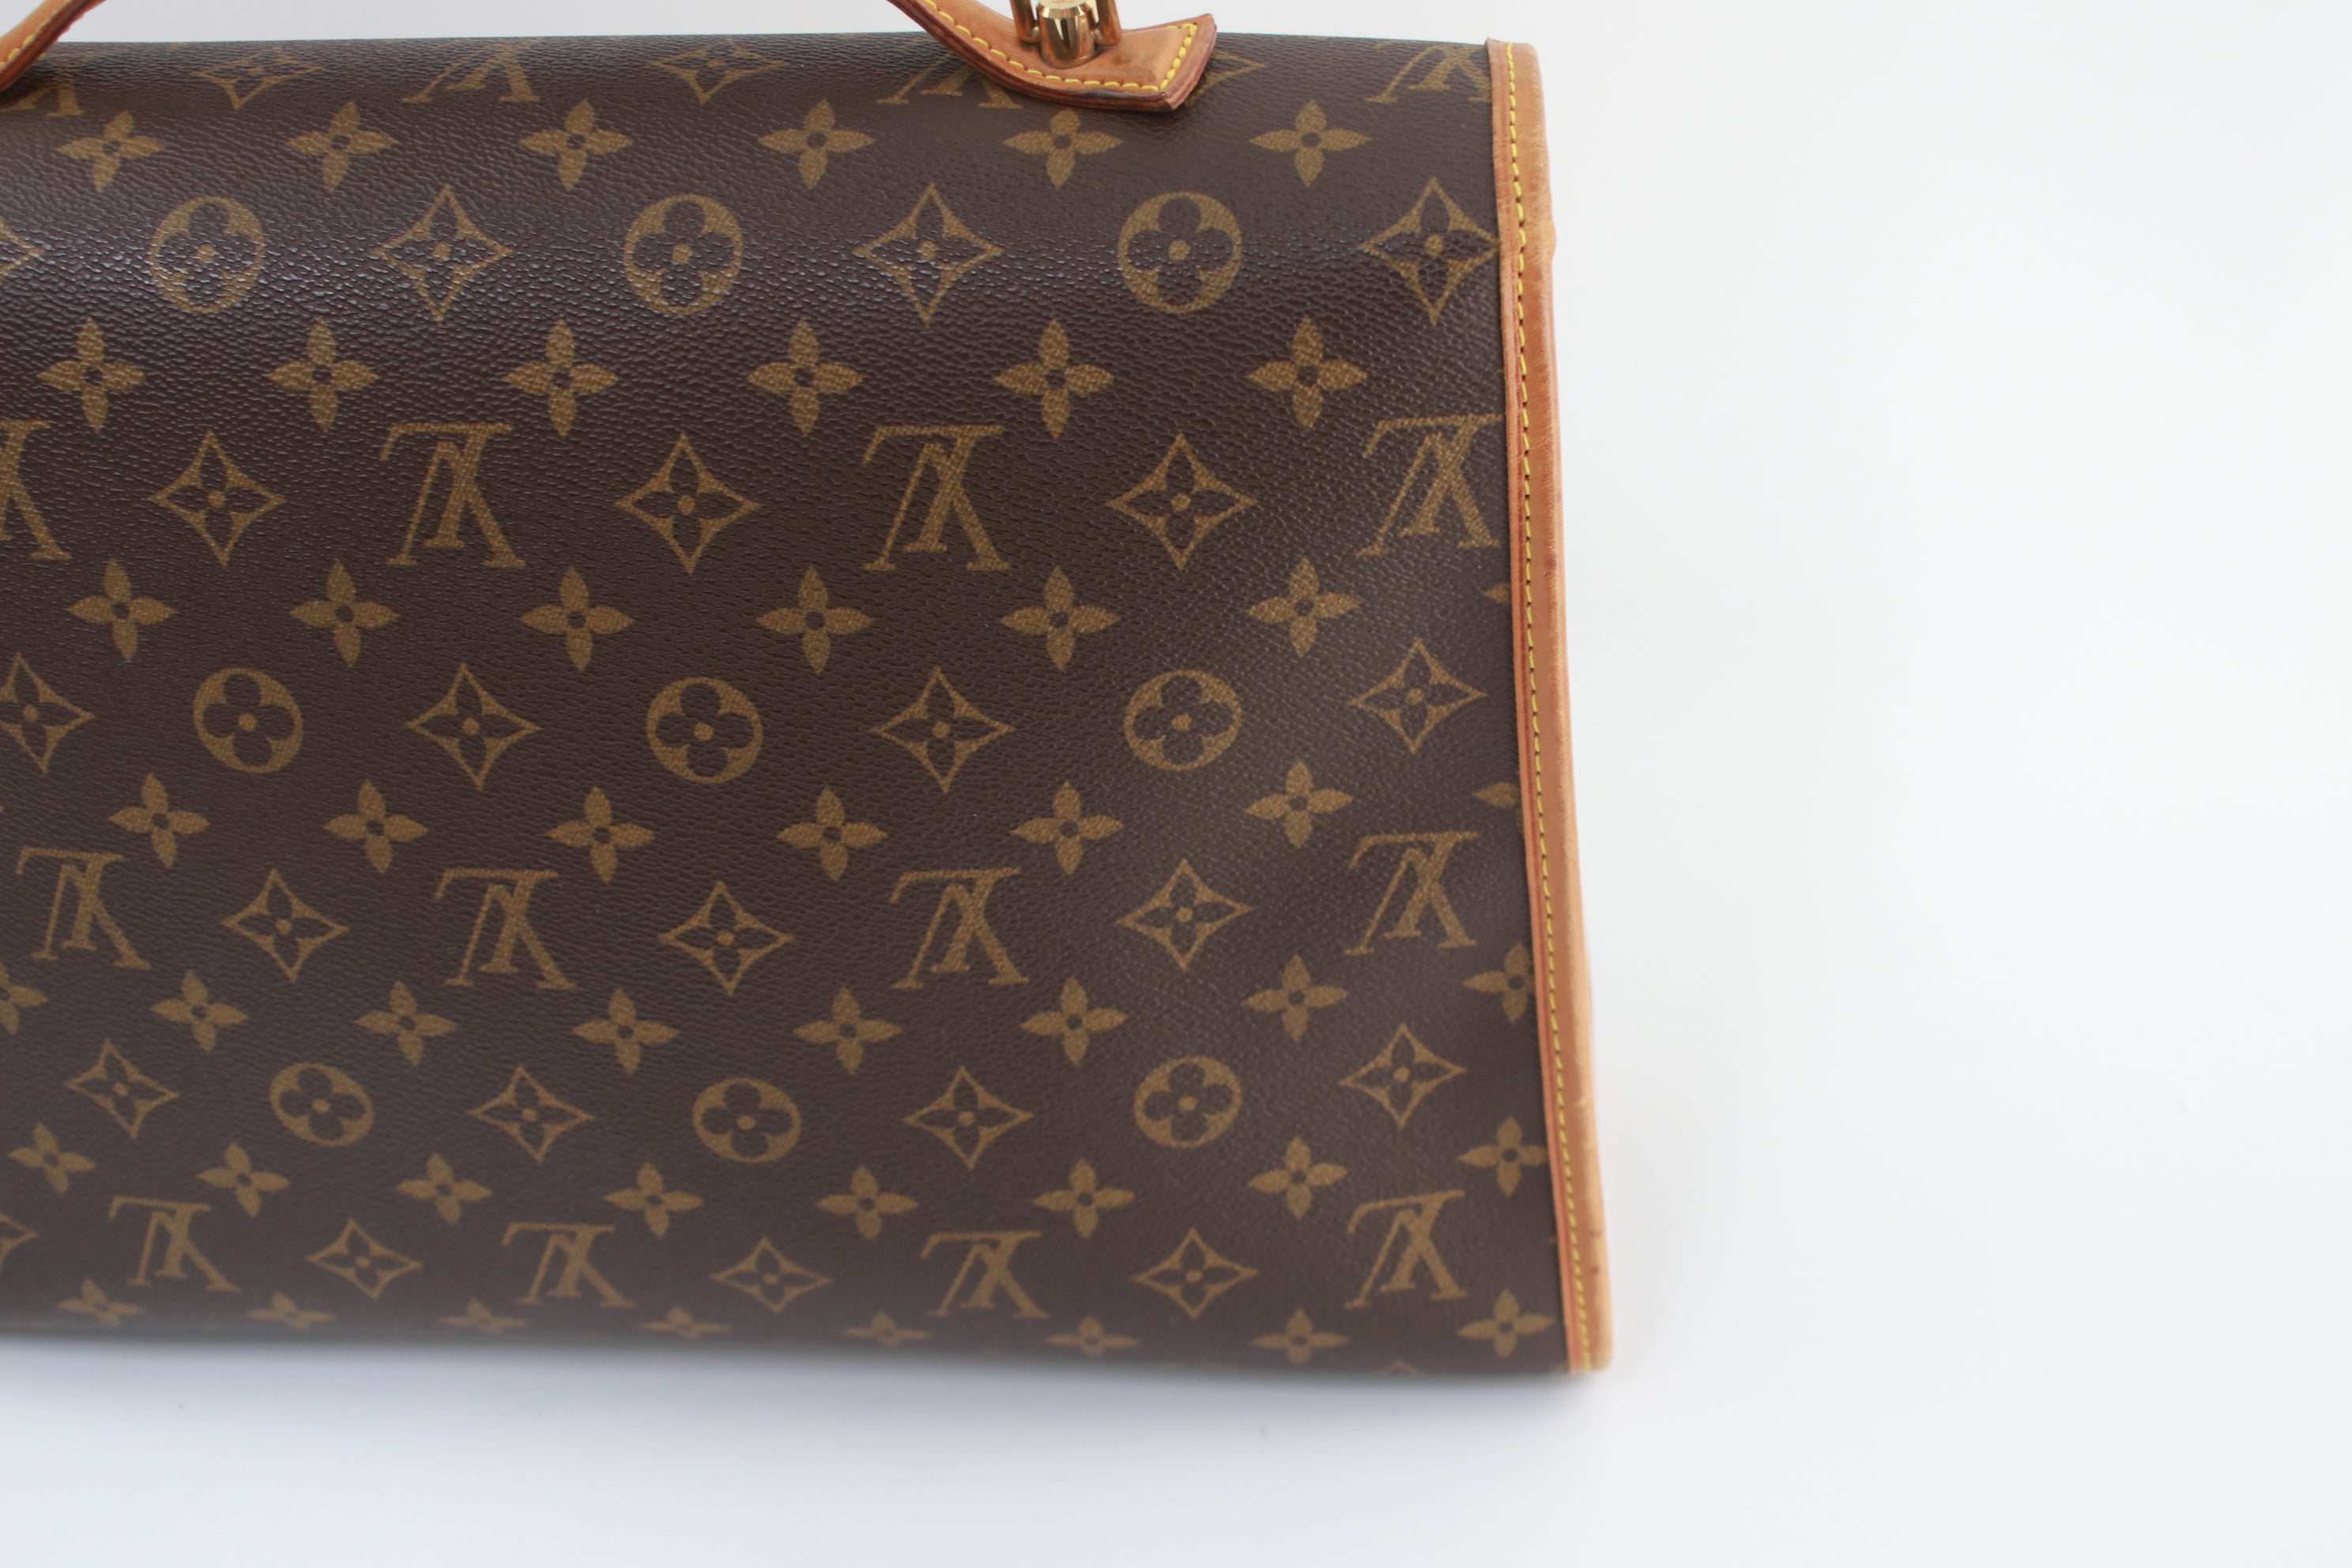 Louis Vuitton Beverly Two Way Shoulder Bag Used (6767)